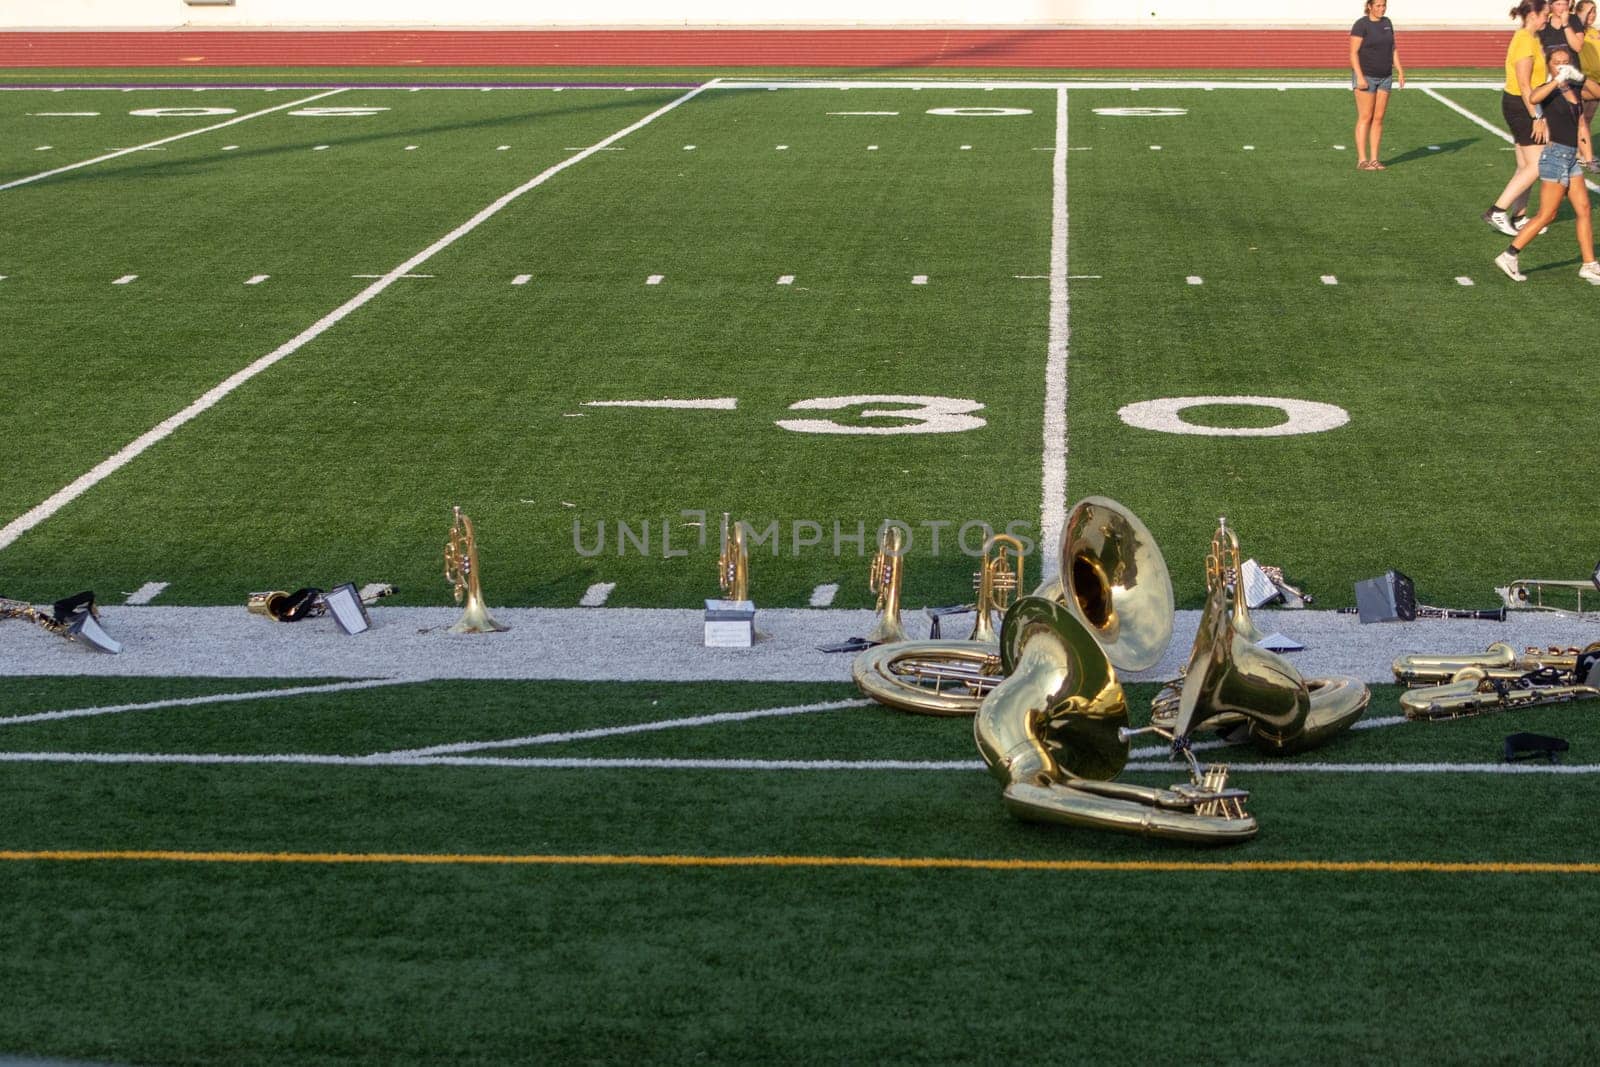 High school band instruments up close on foot ball field 30 yard line. High quality photo